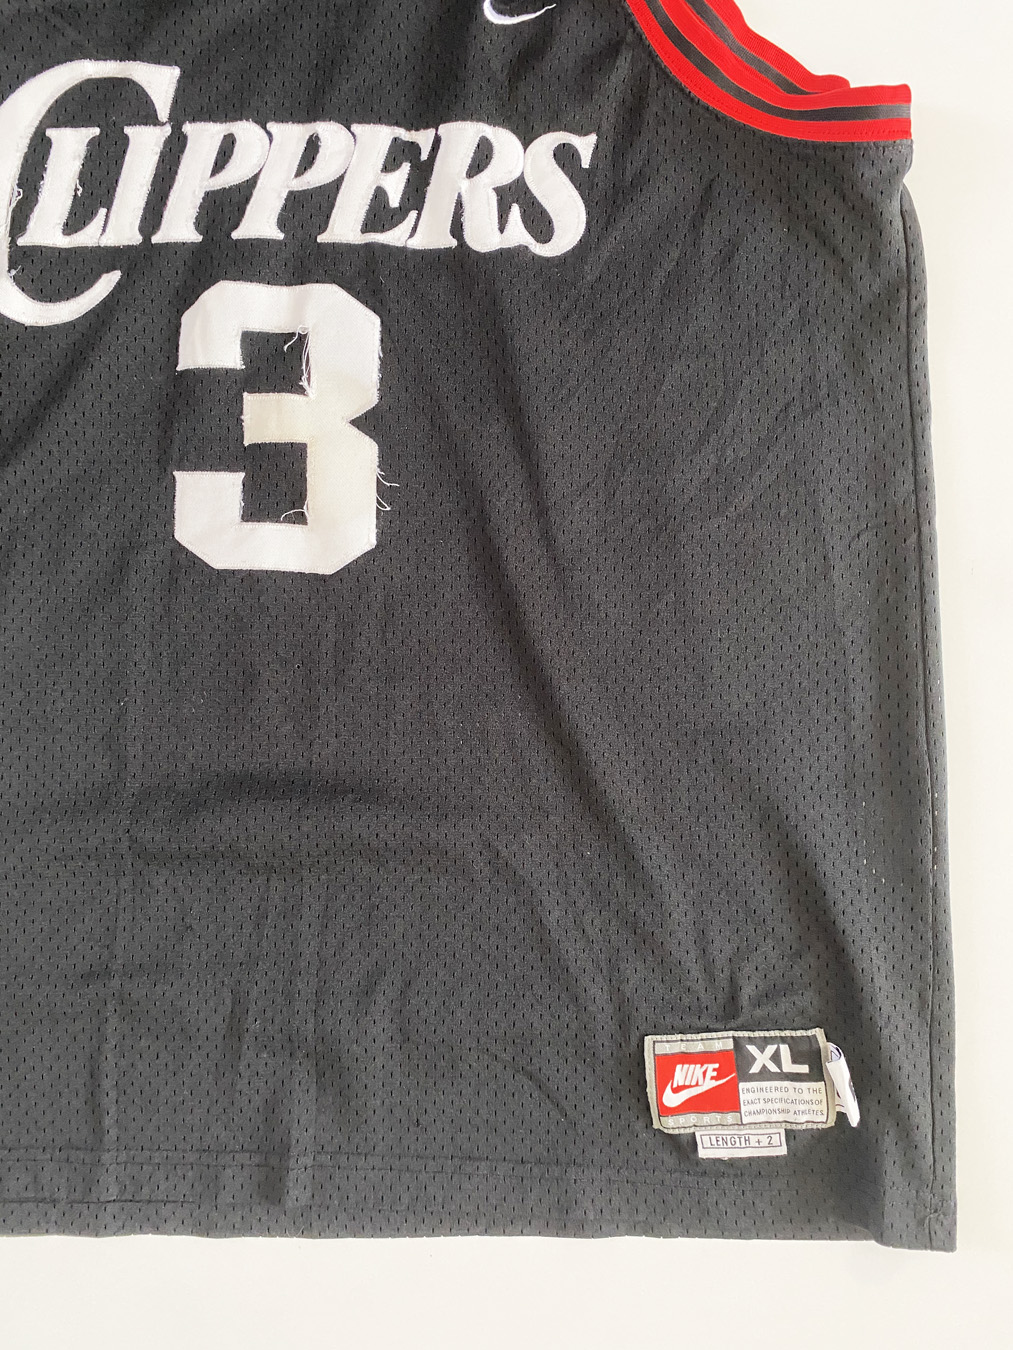 Vintage QUENTIN RICHARDSON Los Angeles CLIPPERS NIKE Sewn Youth Large  Jersey EUC